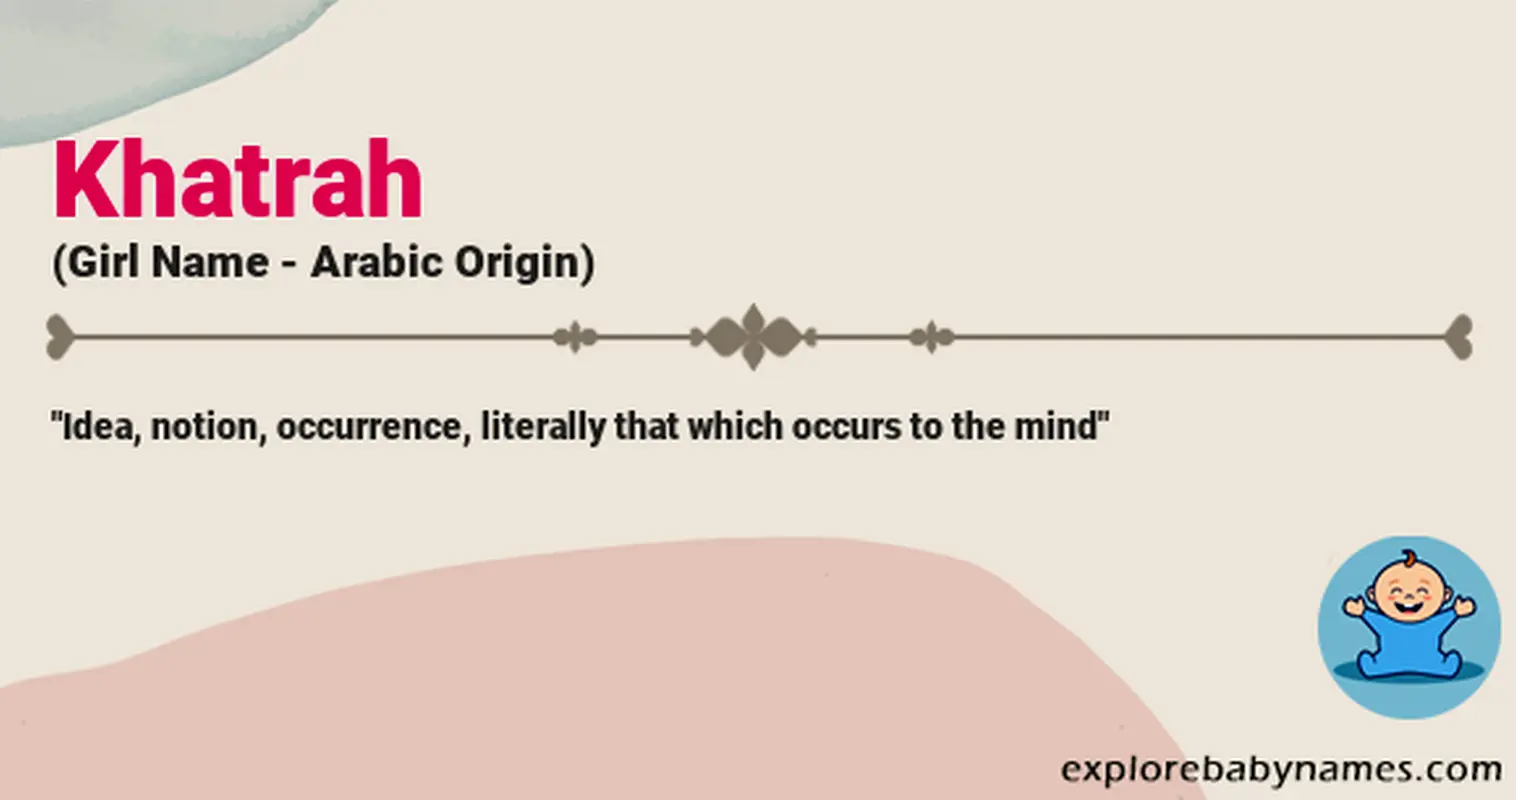 Meaning of Khatrah